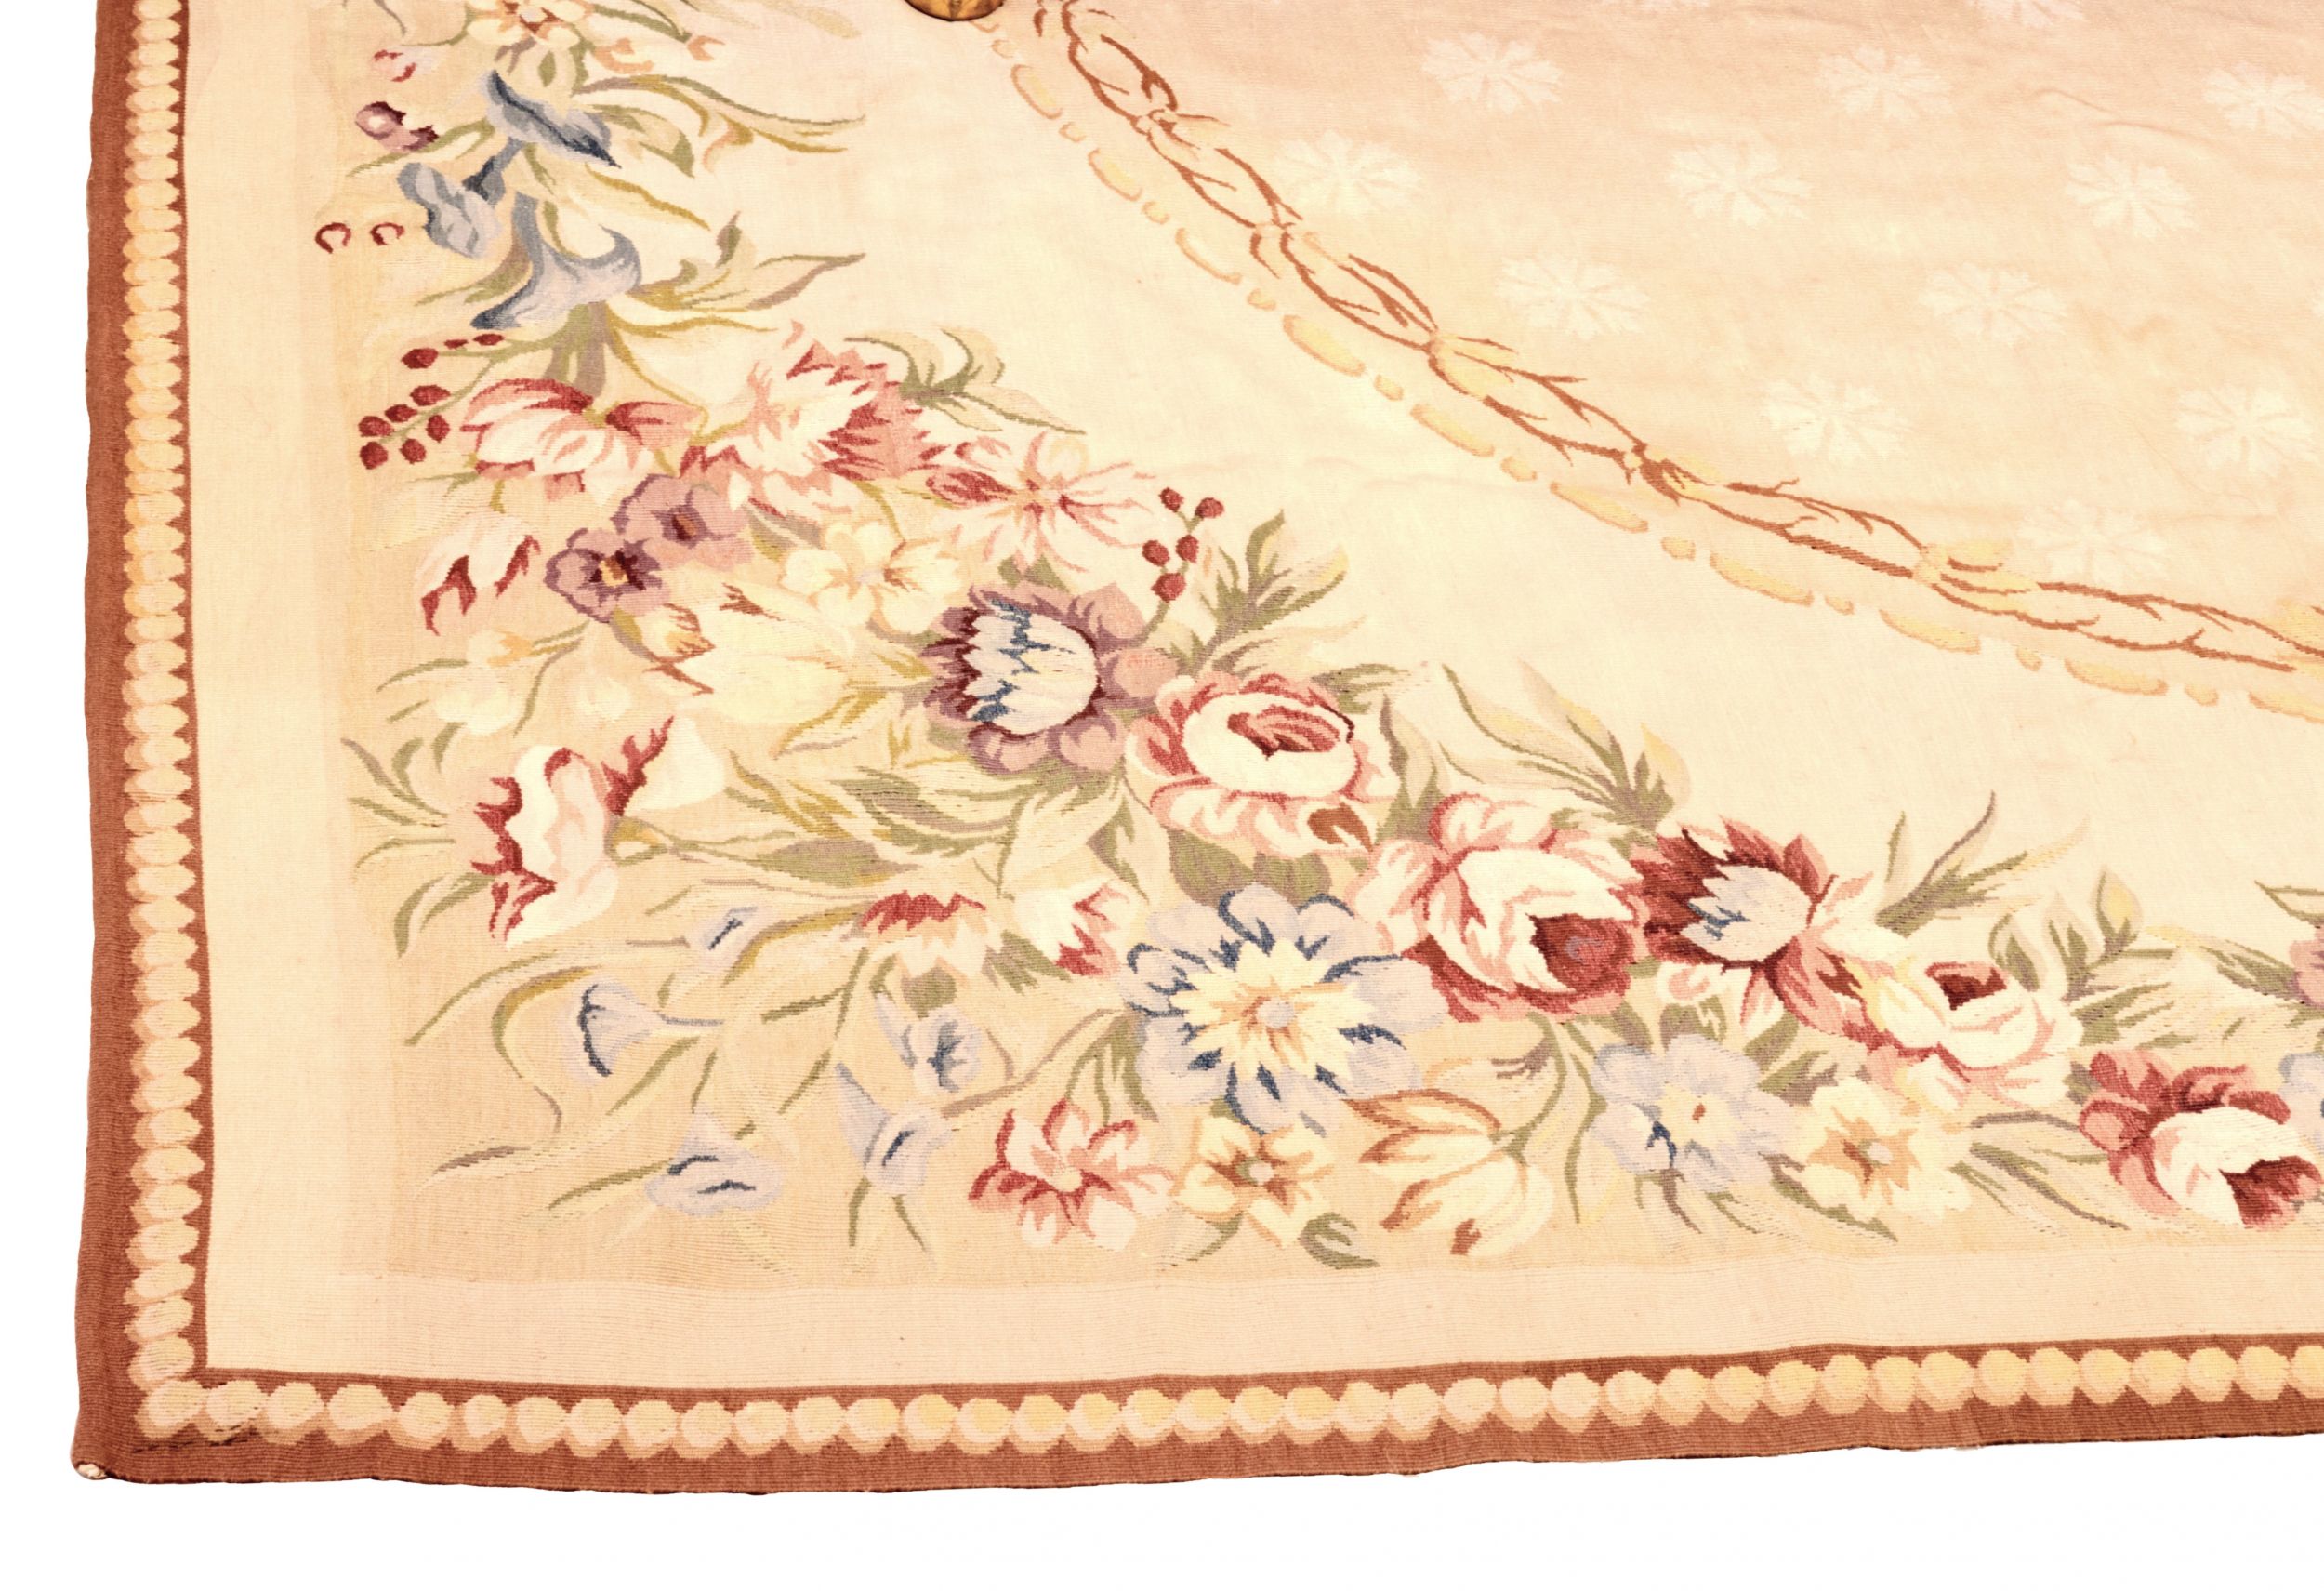 Floral tapestry in Aubusson style. The end of the 19th century. - Image 3 of 4